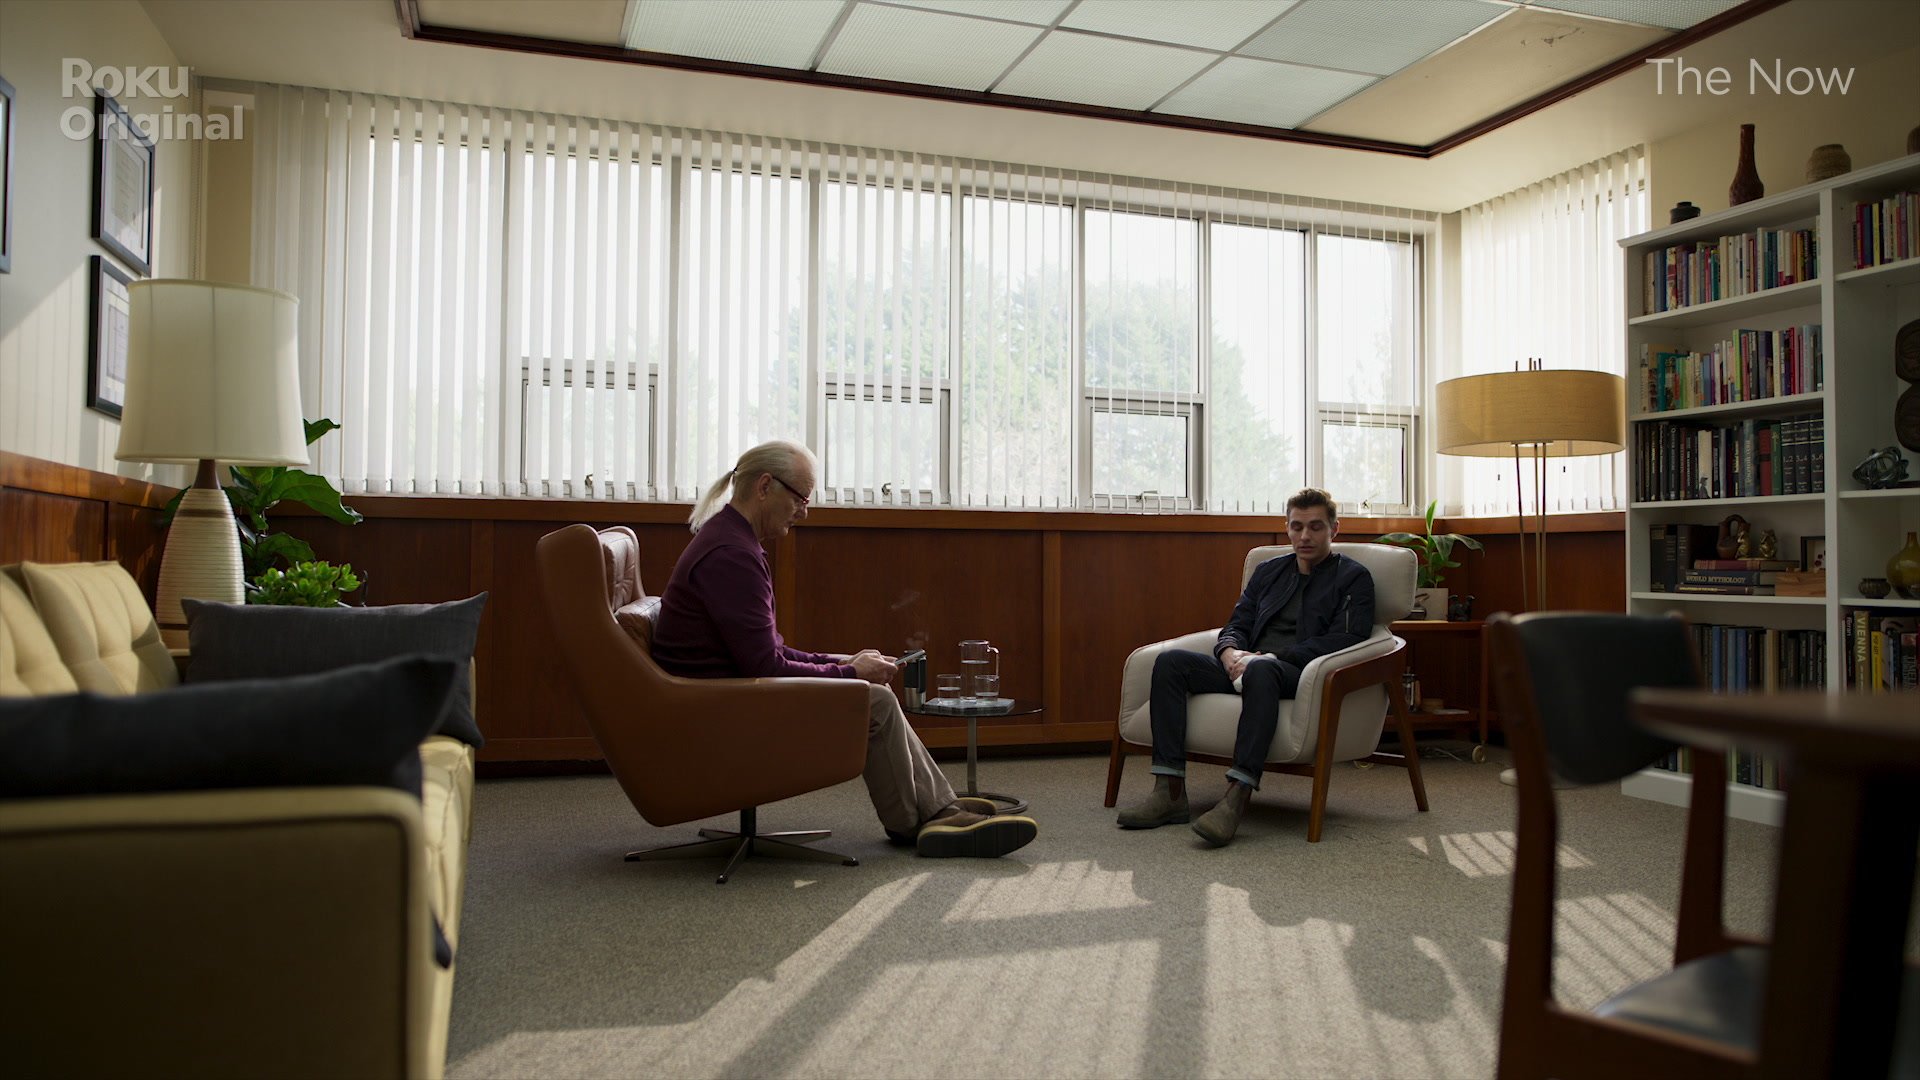 Bill Murray sits in a chair across from Dave Franco in a still from the new Roku Original series called 'The Now'